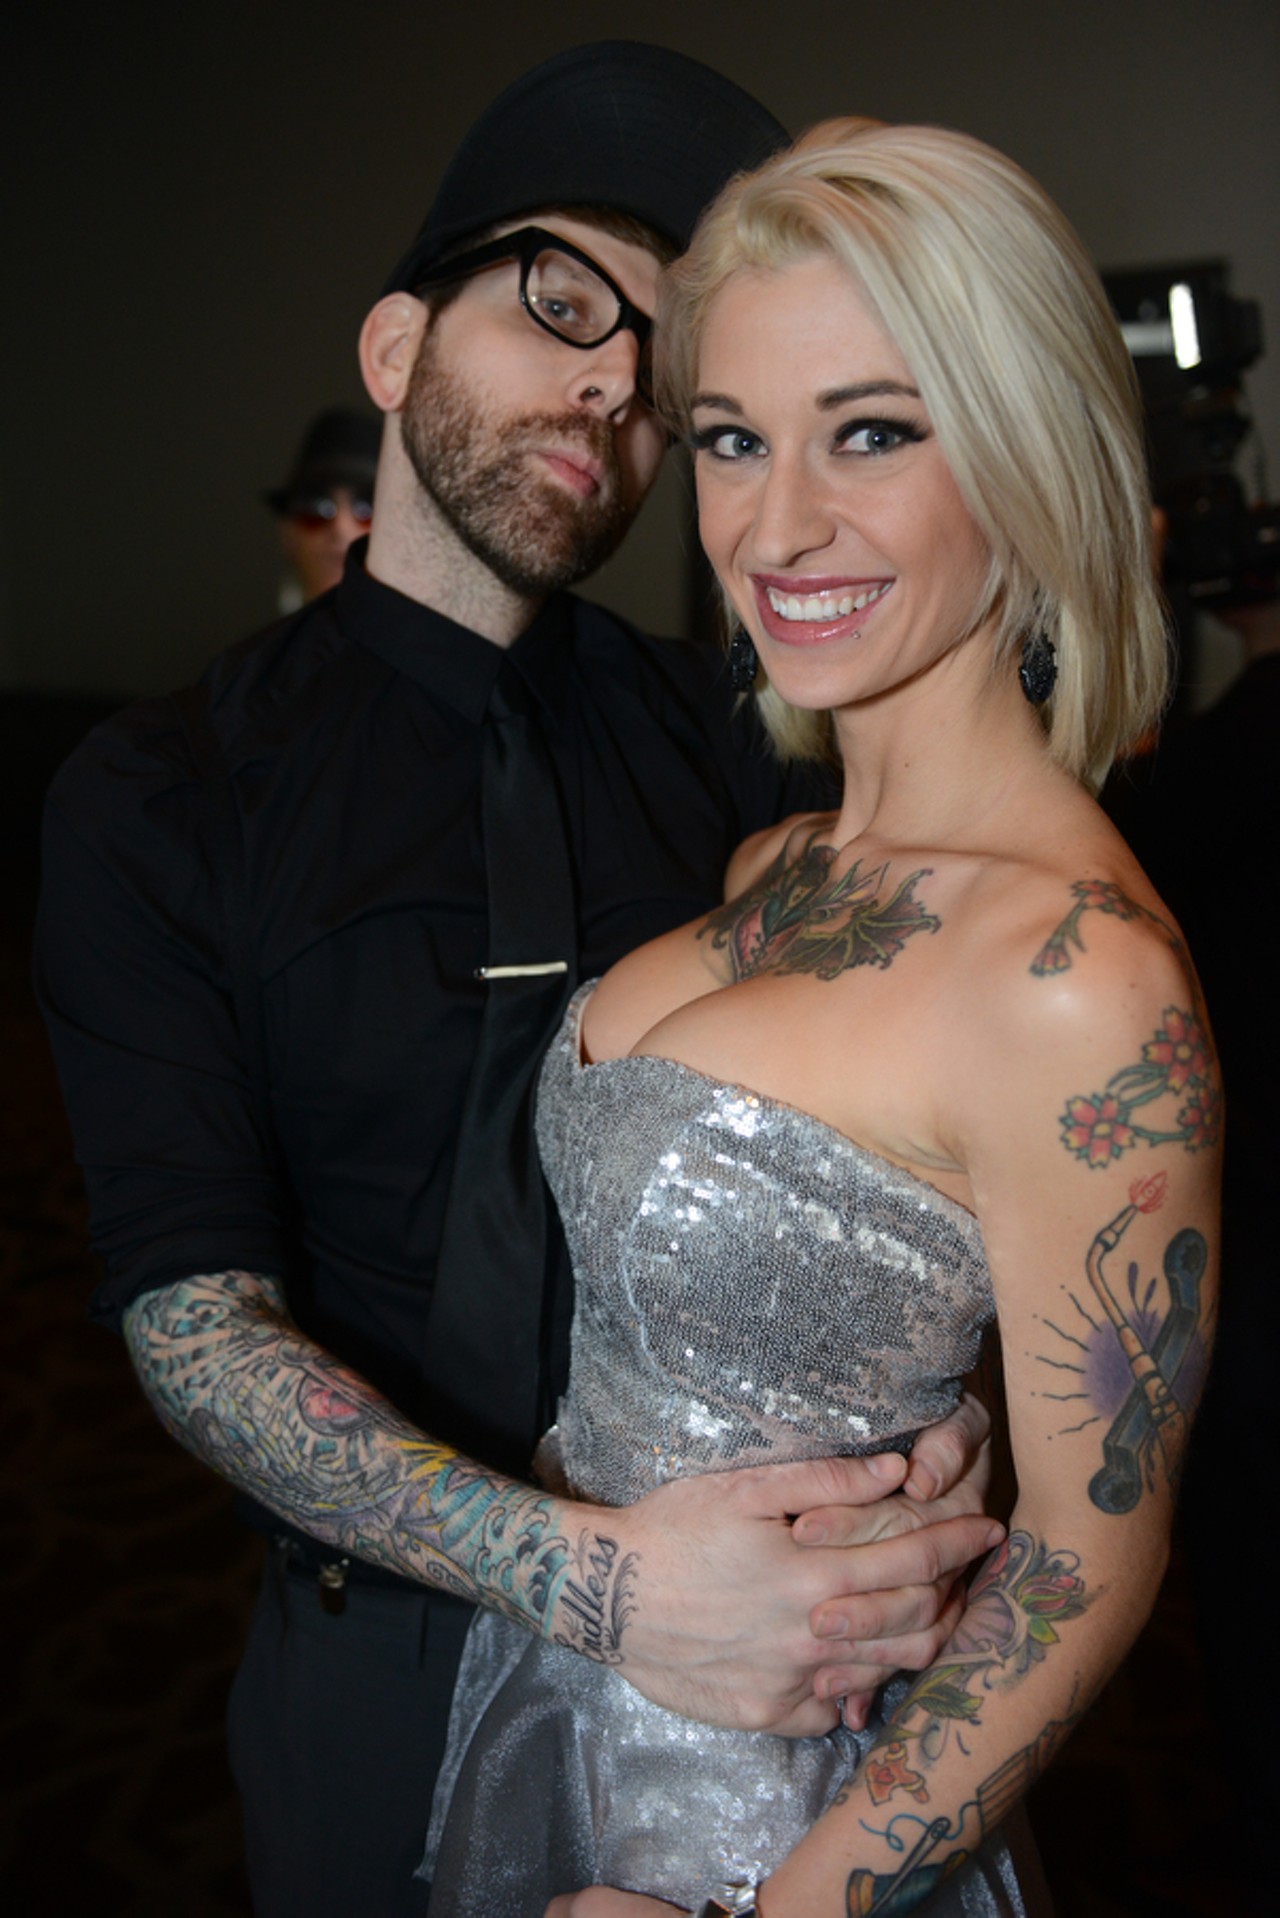 Porn Stars and Starlets Celebrate at the 2014 AVN Awards (NSFW)